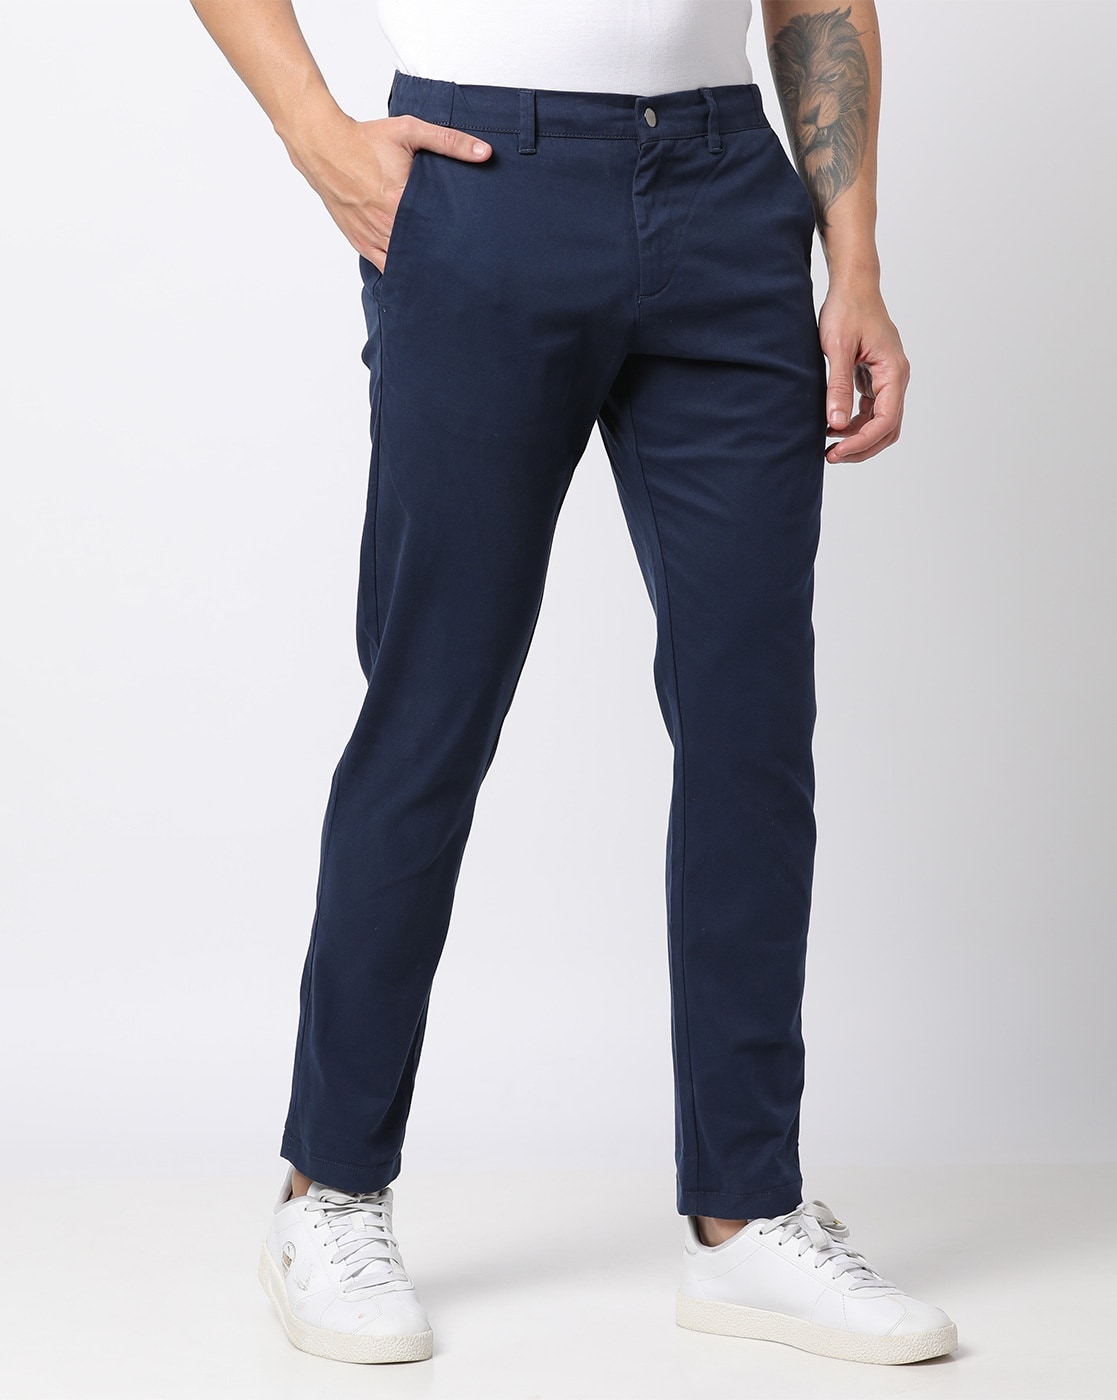 Buy Cliths Navy Blue Formal Pants for Men Slim FitFlat Front Fromal  Trousers for Men Cotton at Amazonin